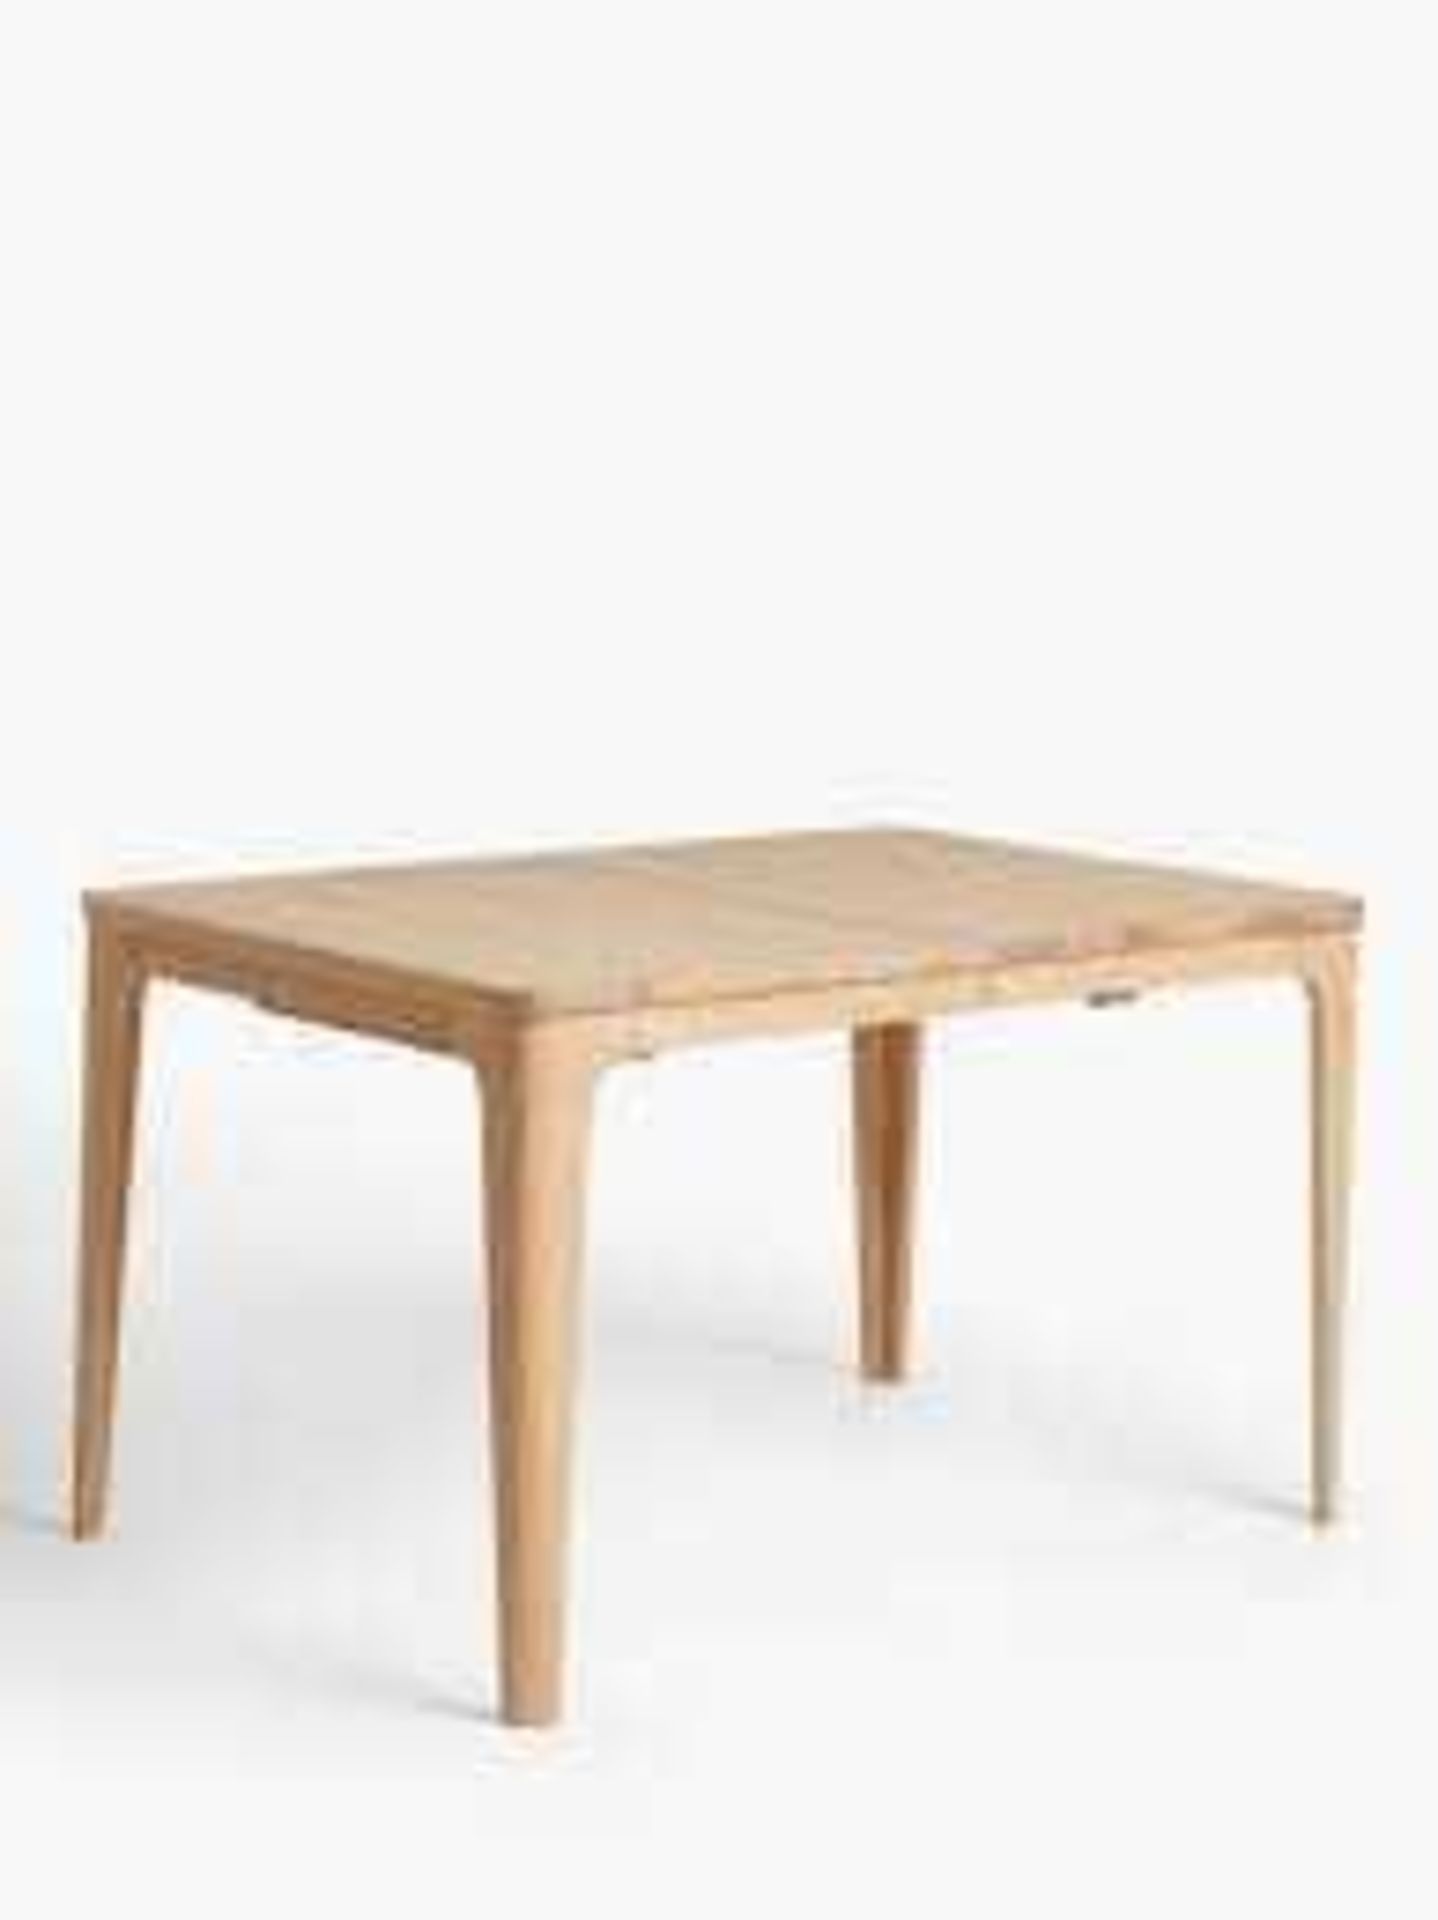 RRP £800 Unboxed Ebbe Gehl For John Lewis Mira 4-8 Seater Extending Dining Table, Oak